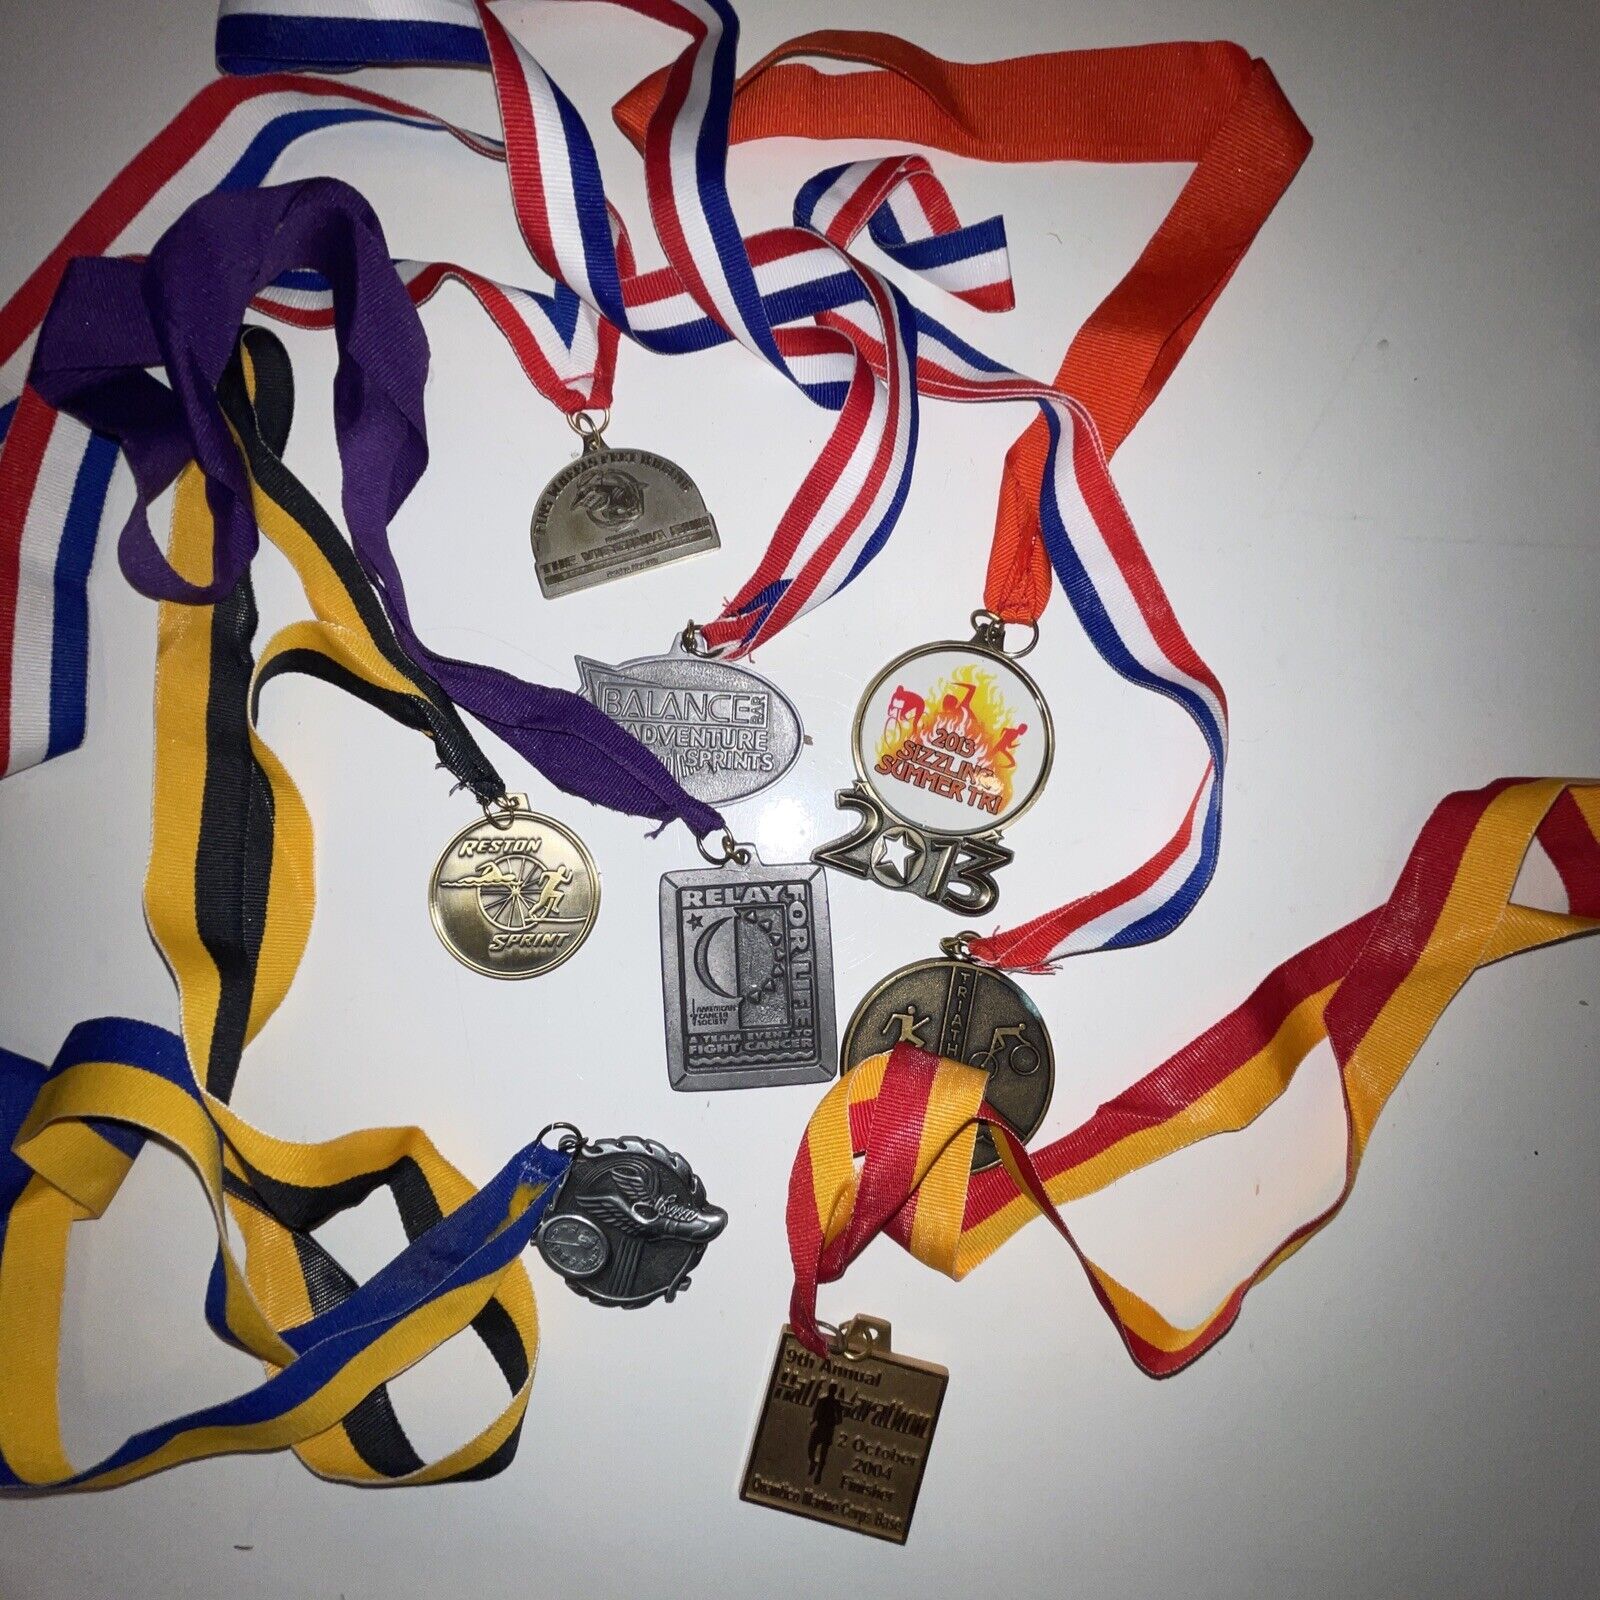 LOT OF 8 SPORTS & OTHER VICTORY MEDALS WITH RIBBONS